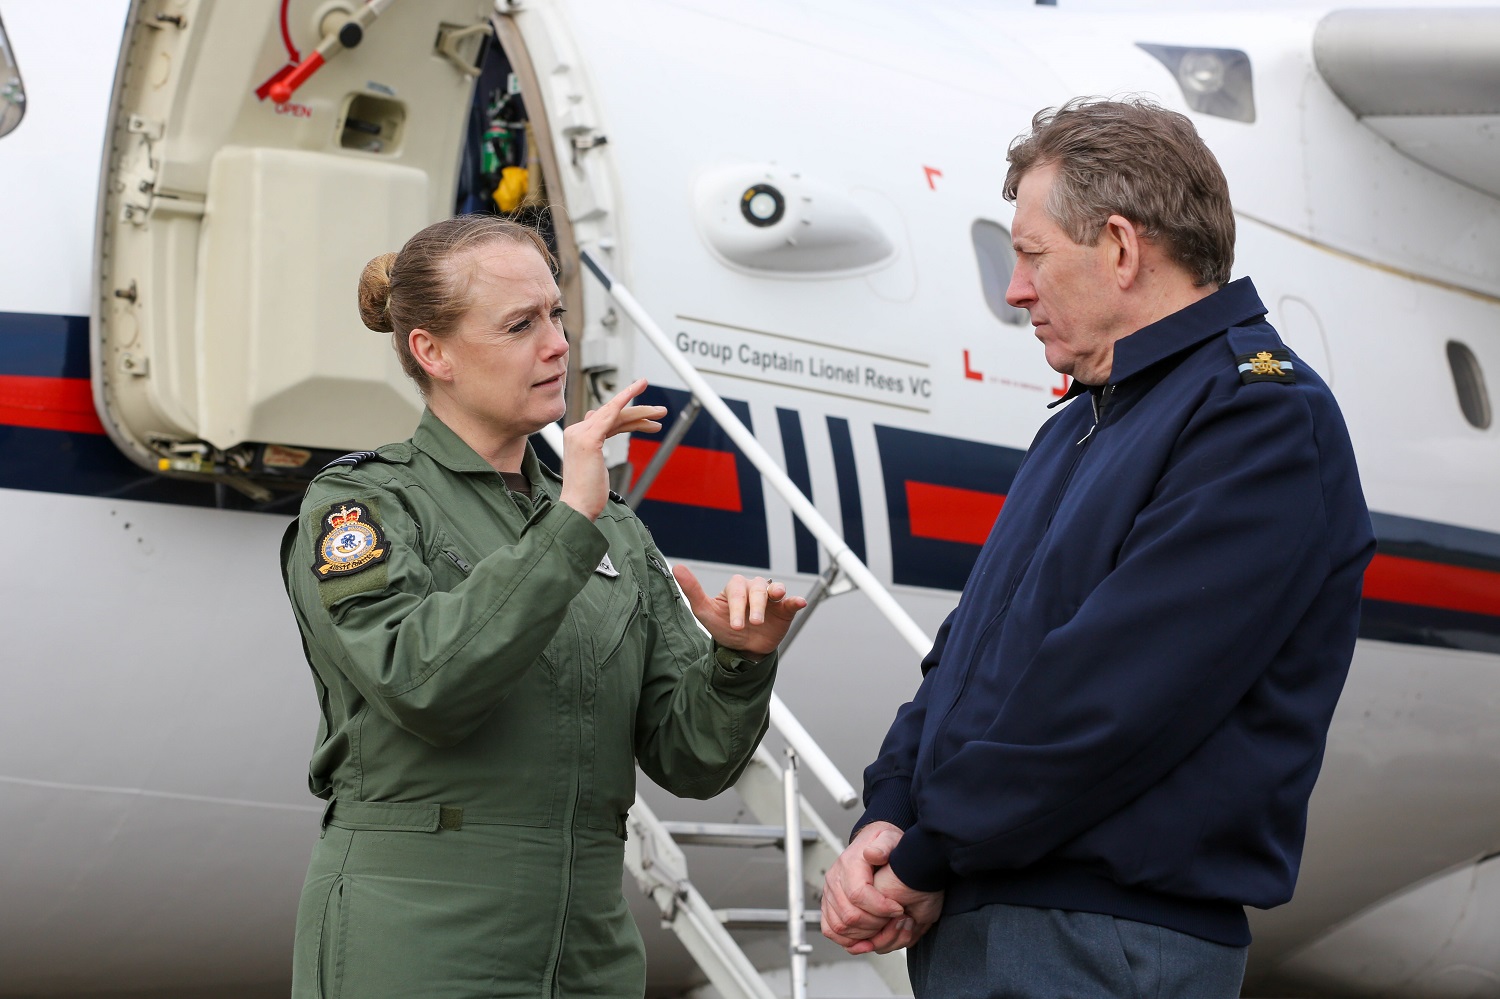 Personnel talk outside BAe146 aircraft.